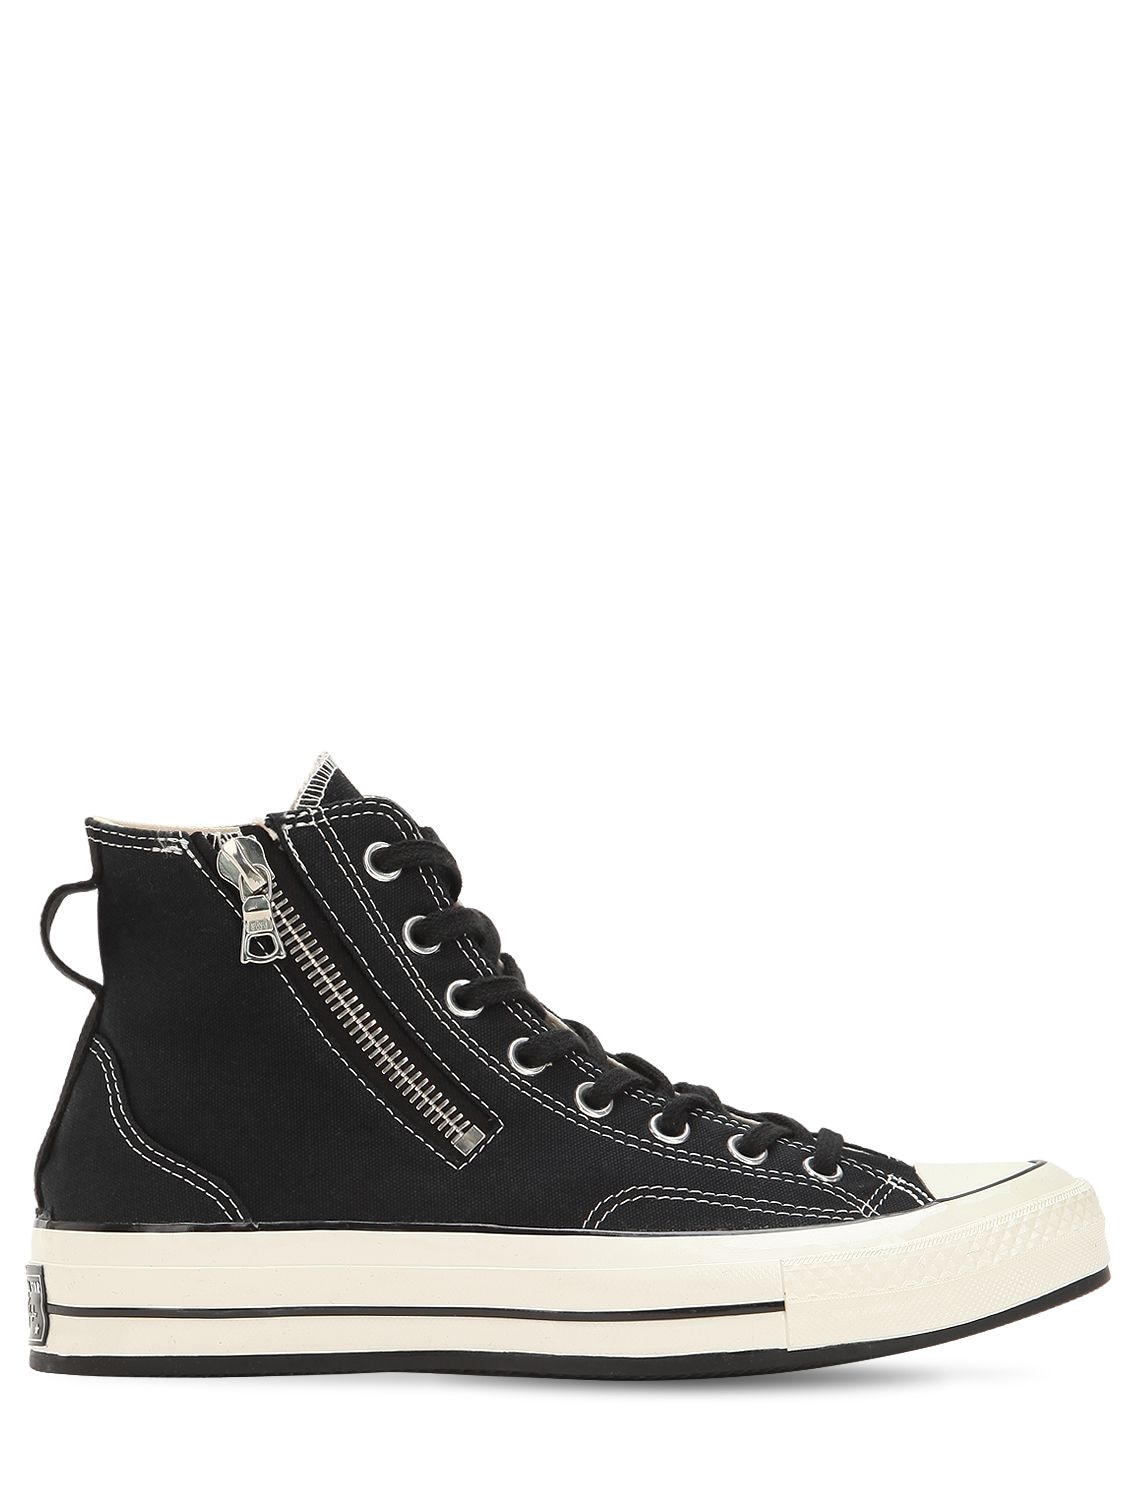 Converse Special Project - Chuck taylor 70's sneakers w/ riri zip ...